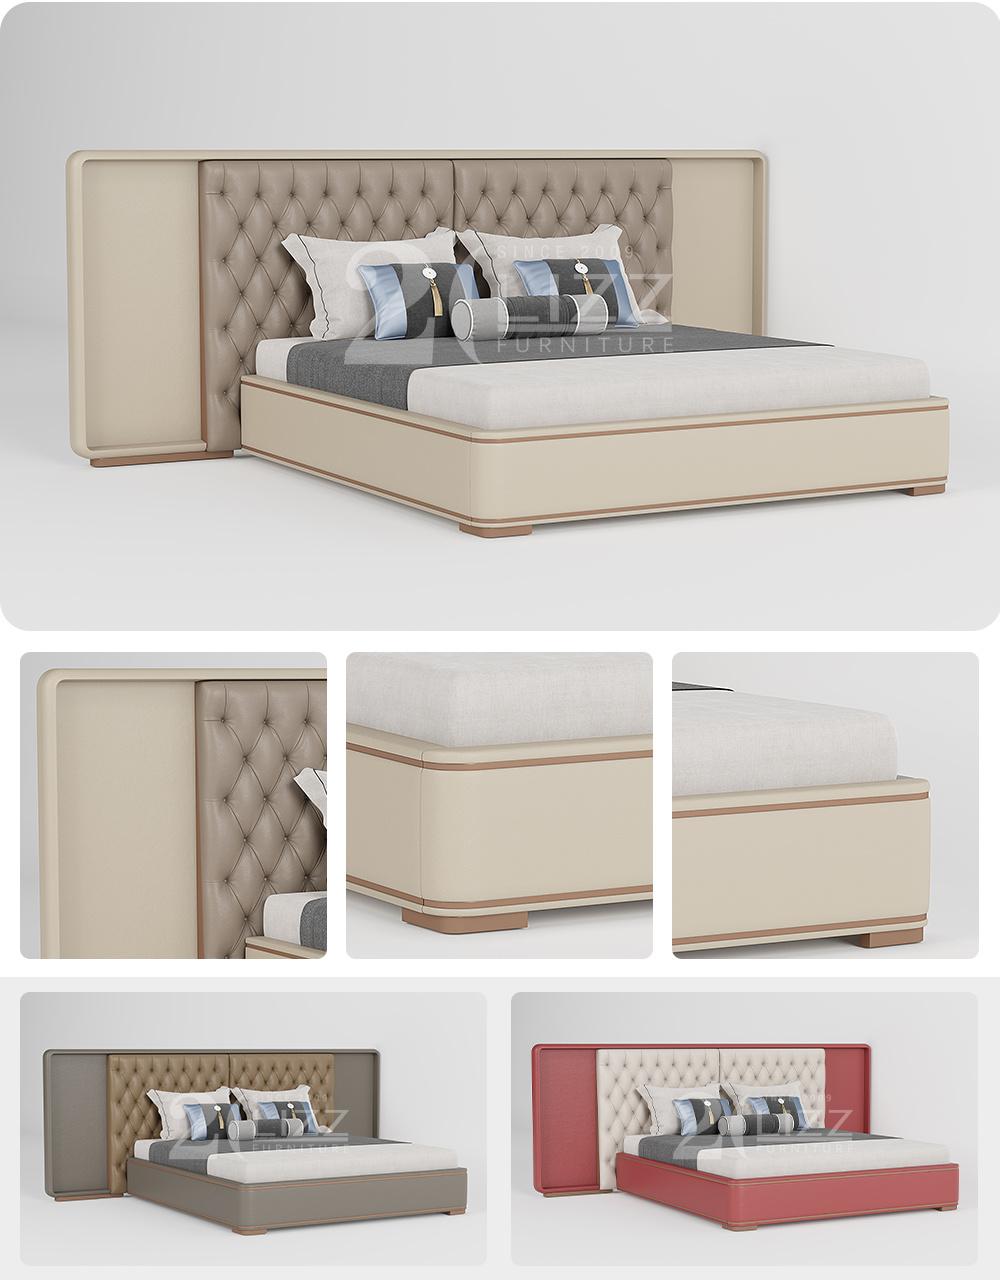 Modern Luxury Design Home Bedroom King Size Leather Bed Set with Big Size Headboard